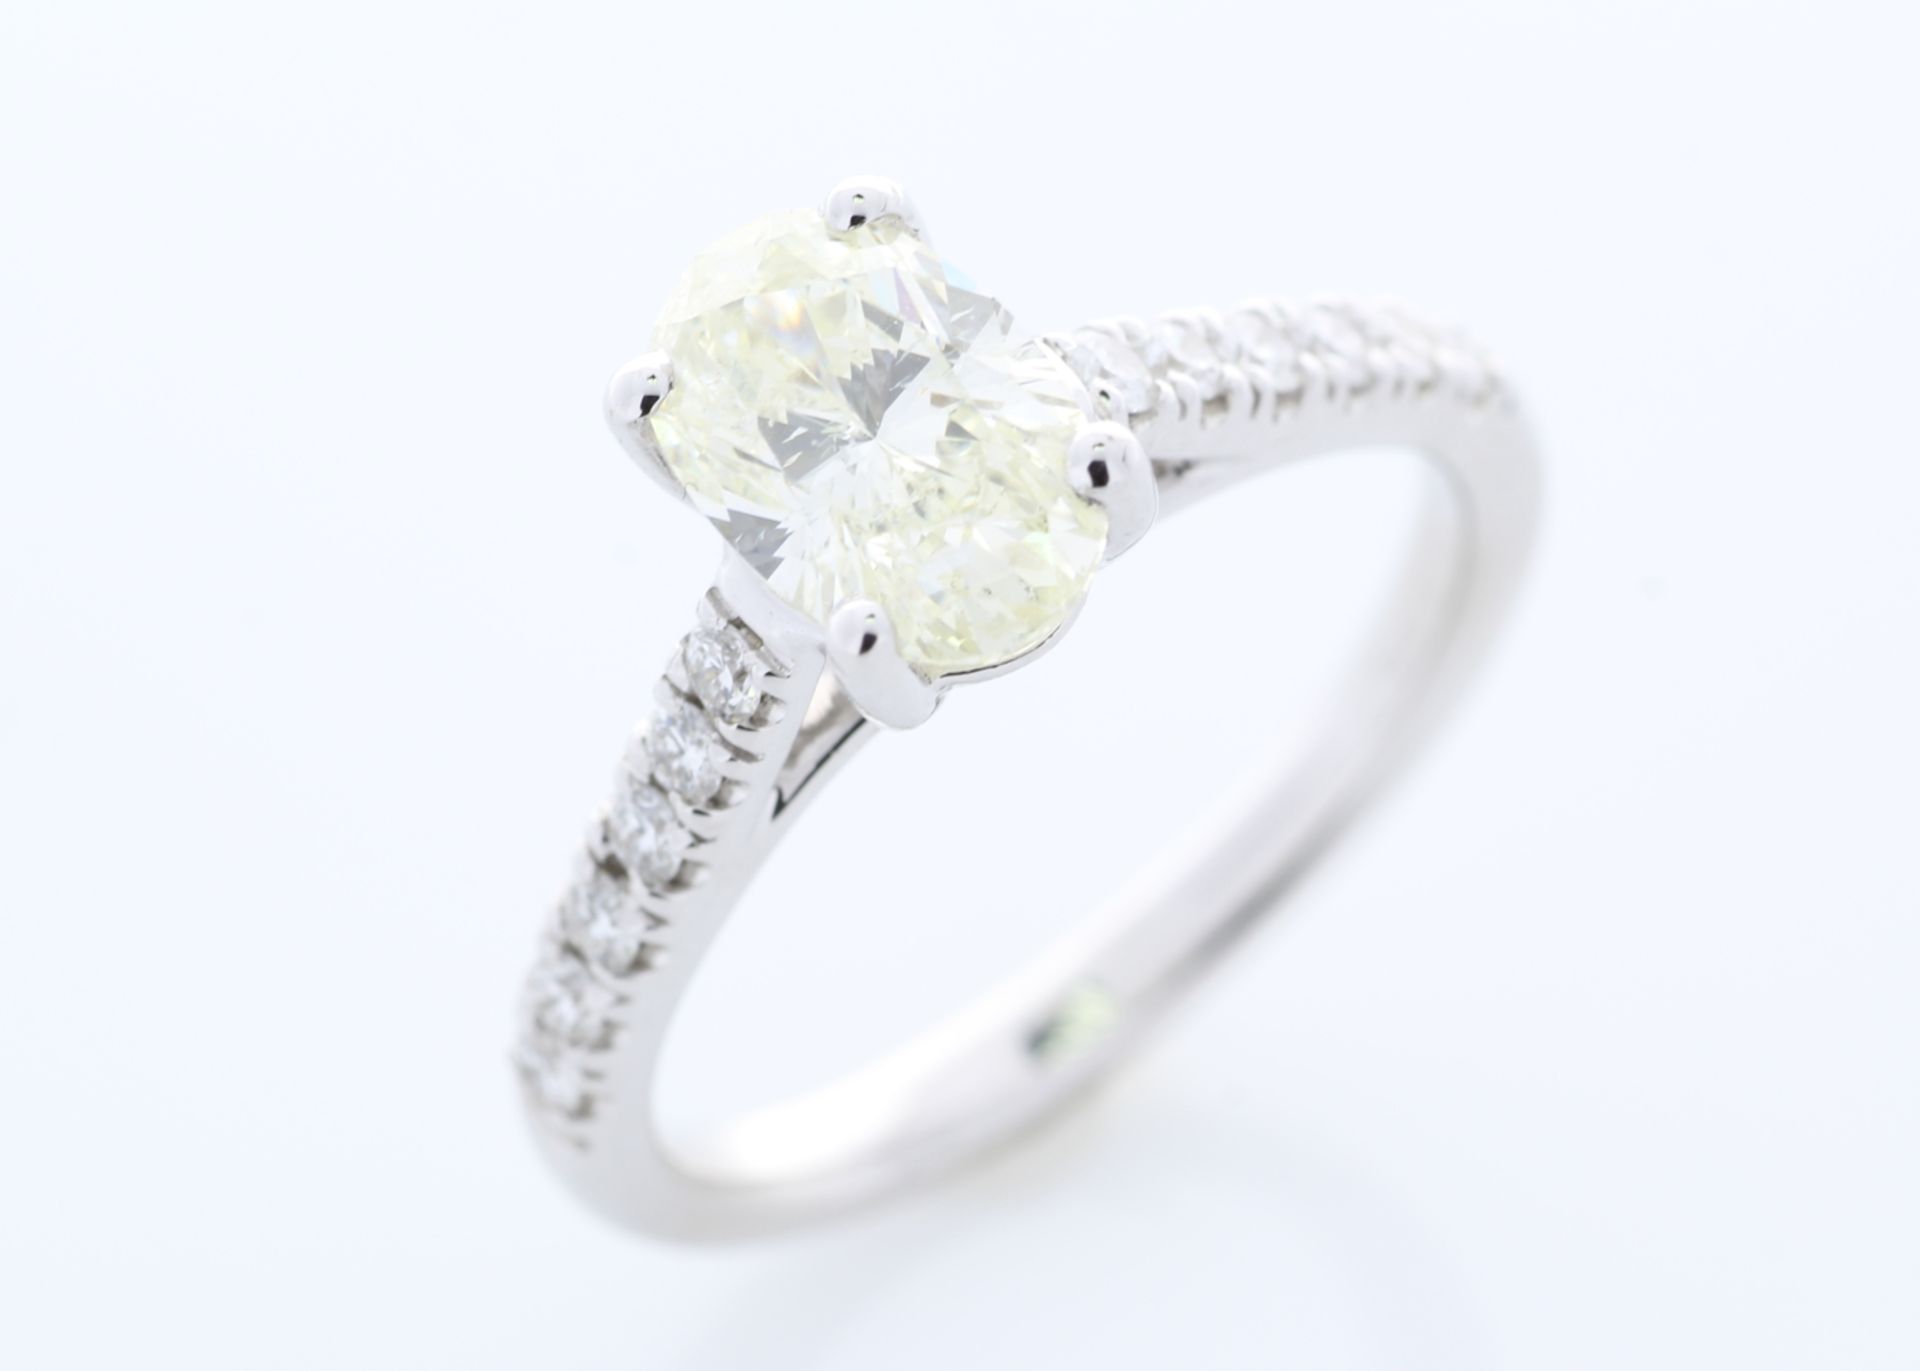 18ct White Gold Single Stone Oval Cut With Stone Set Shoulder Diamond Ring (1.17) 1.39 - Image 5 of 6